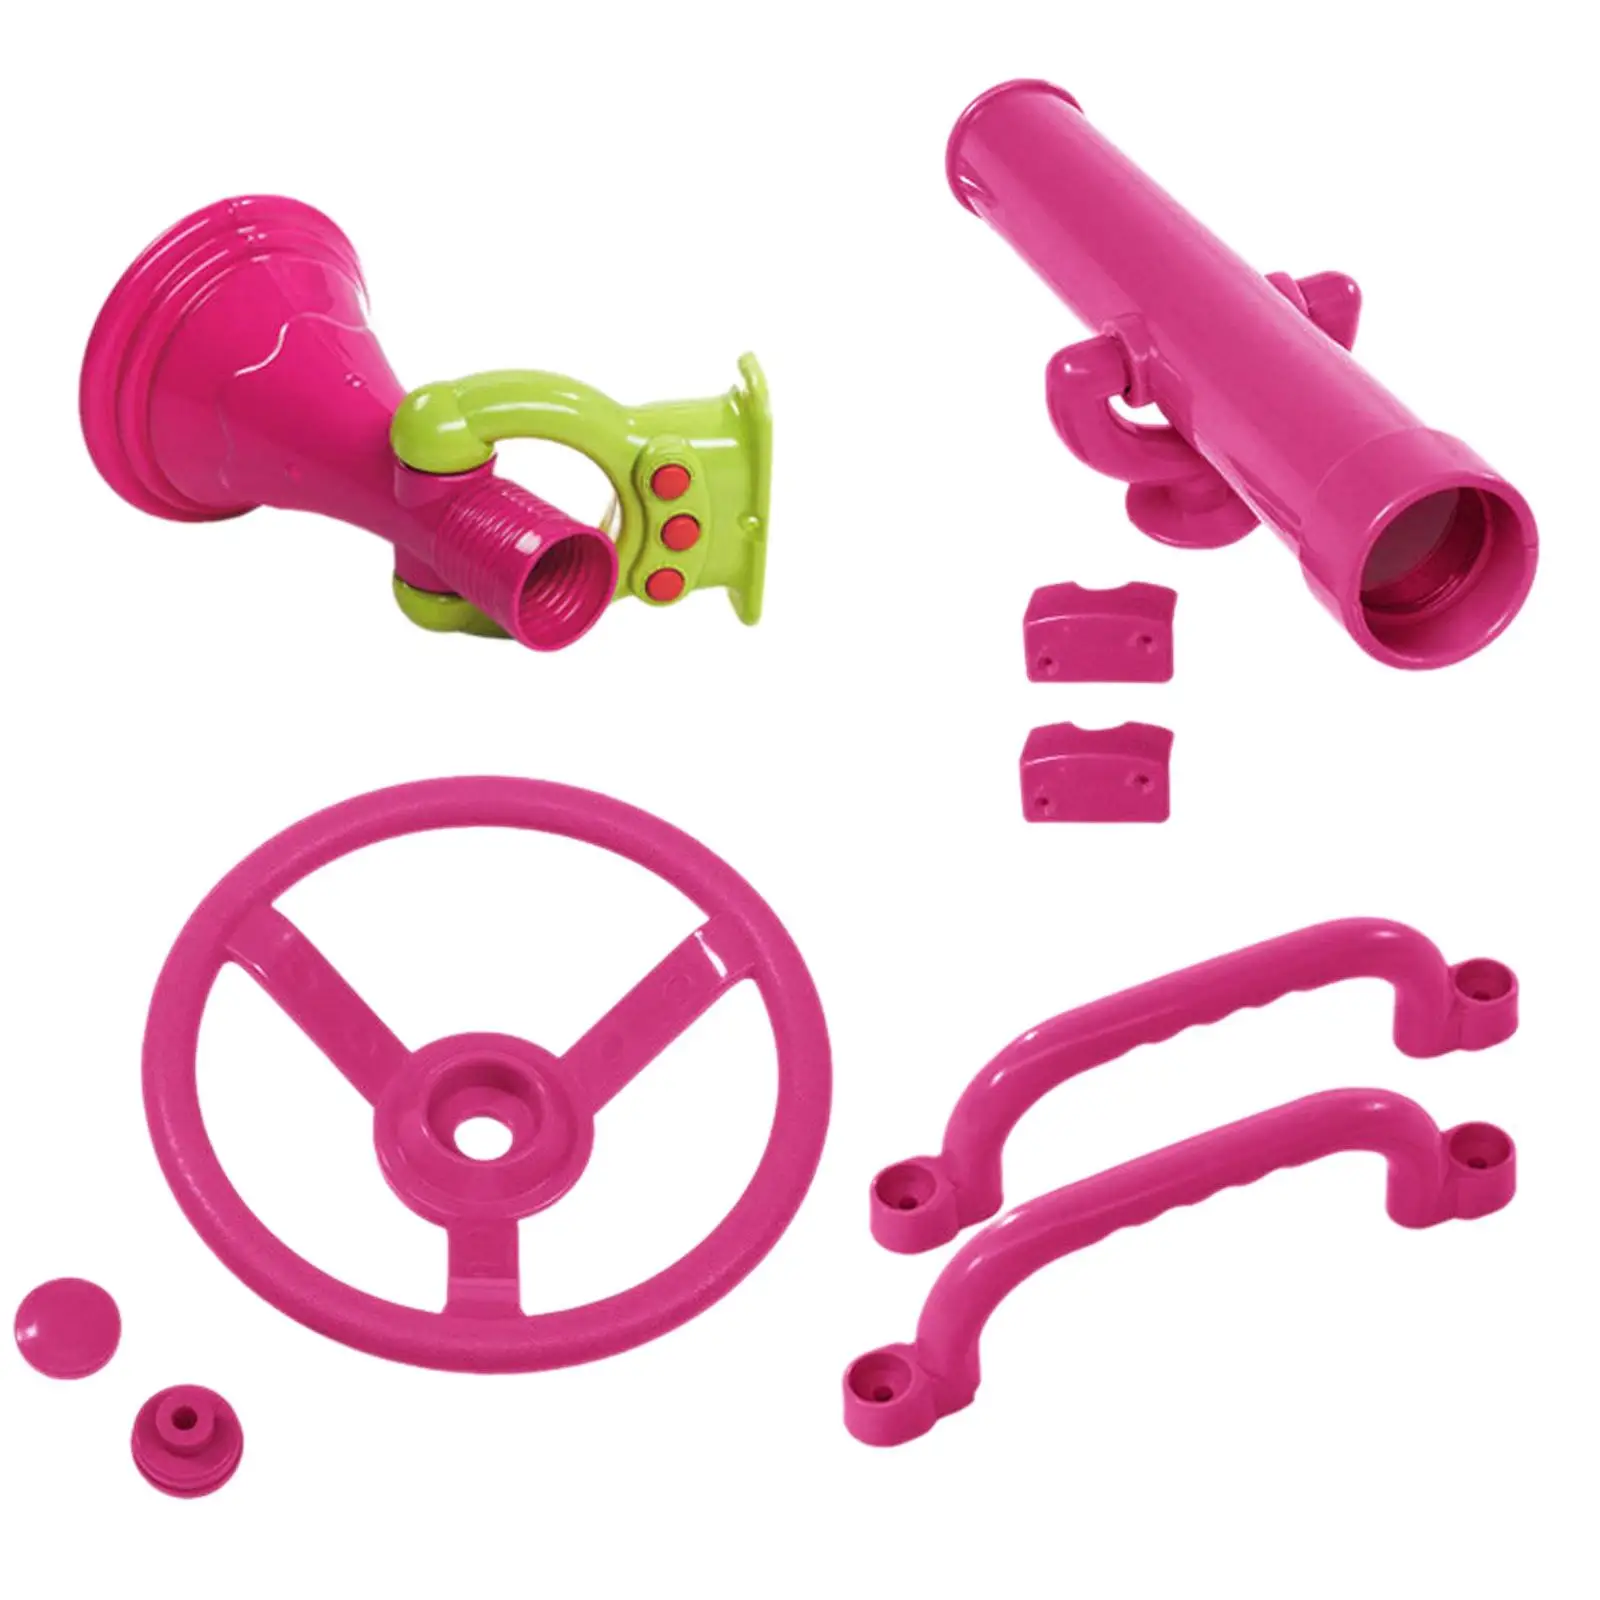 4x Playground Accessories Pink Handles Trumpet Swingset Attachments for Backyard Swingset Treehouse Outdoor Playhouse Boys Girls